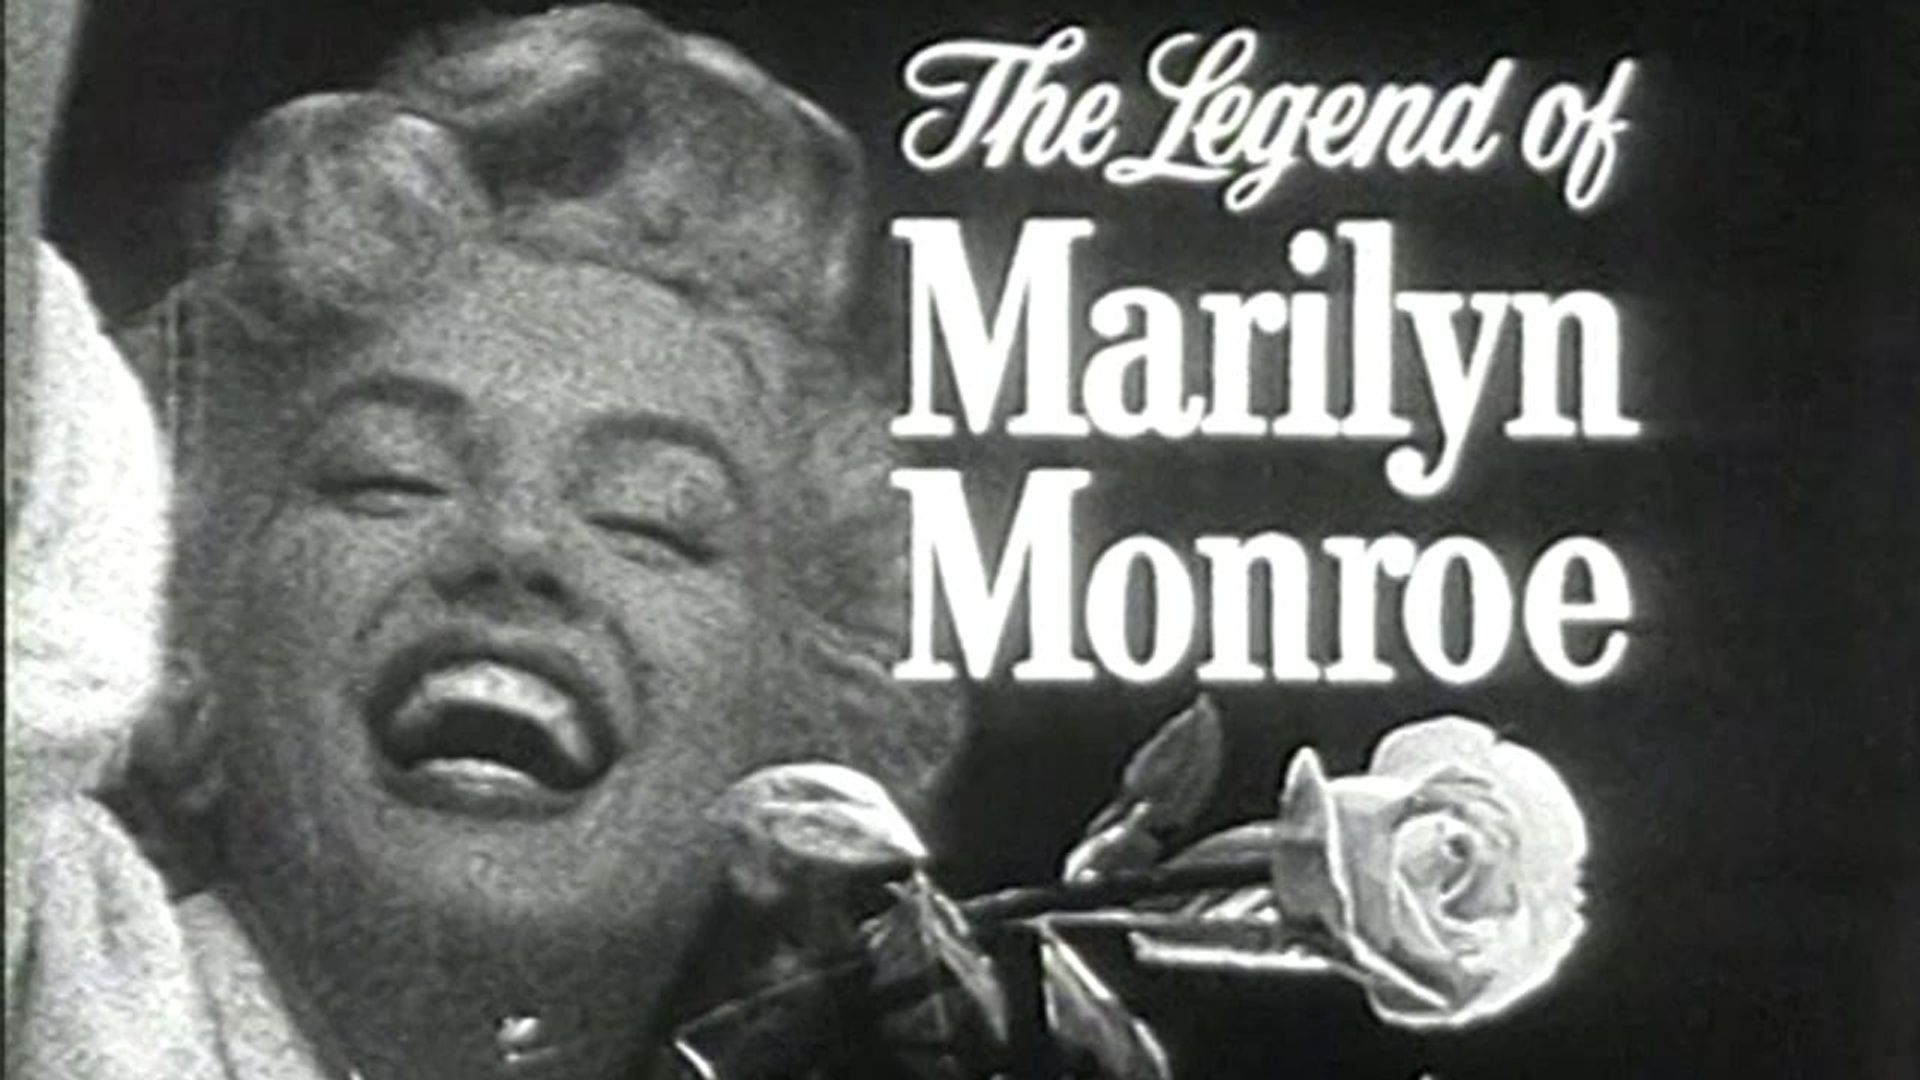 The Legend of Marilyn Monroe background